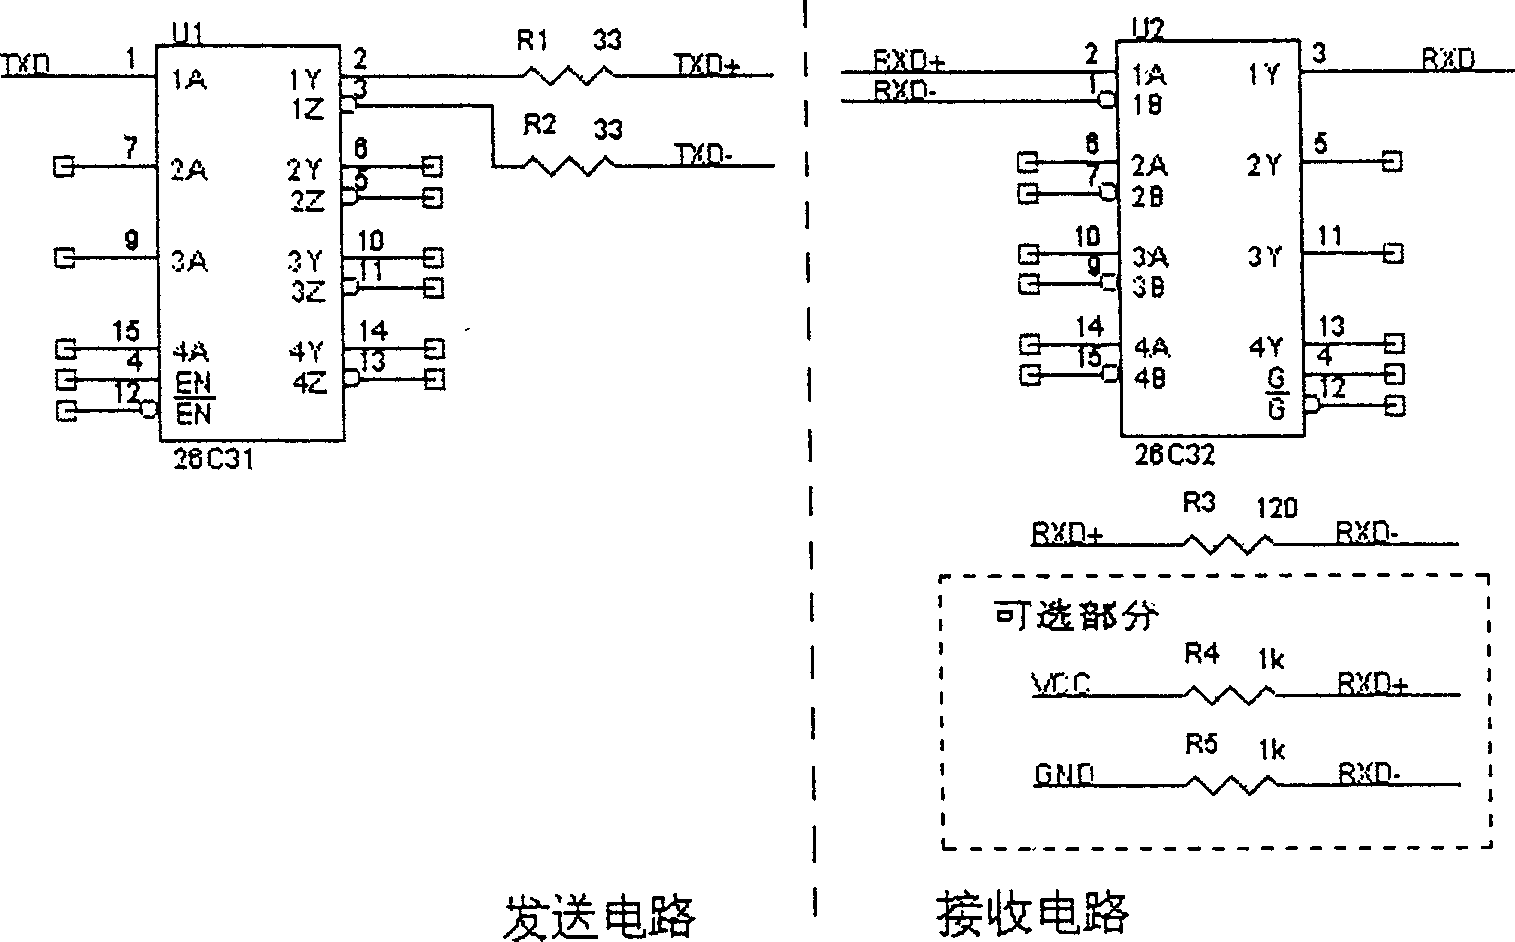 Functional test method for measuring fault at single end of difference serial circuit